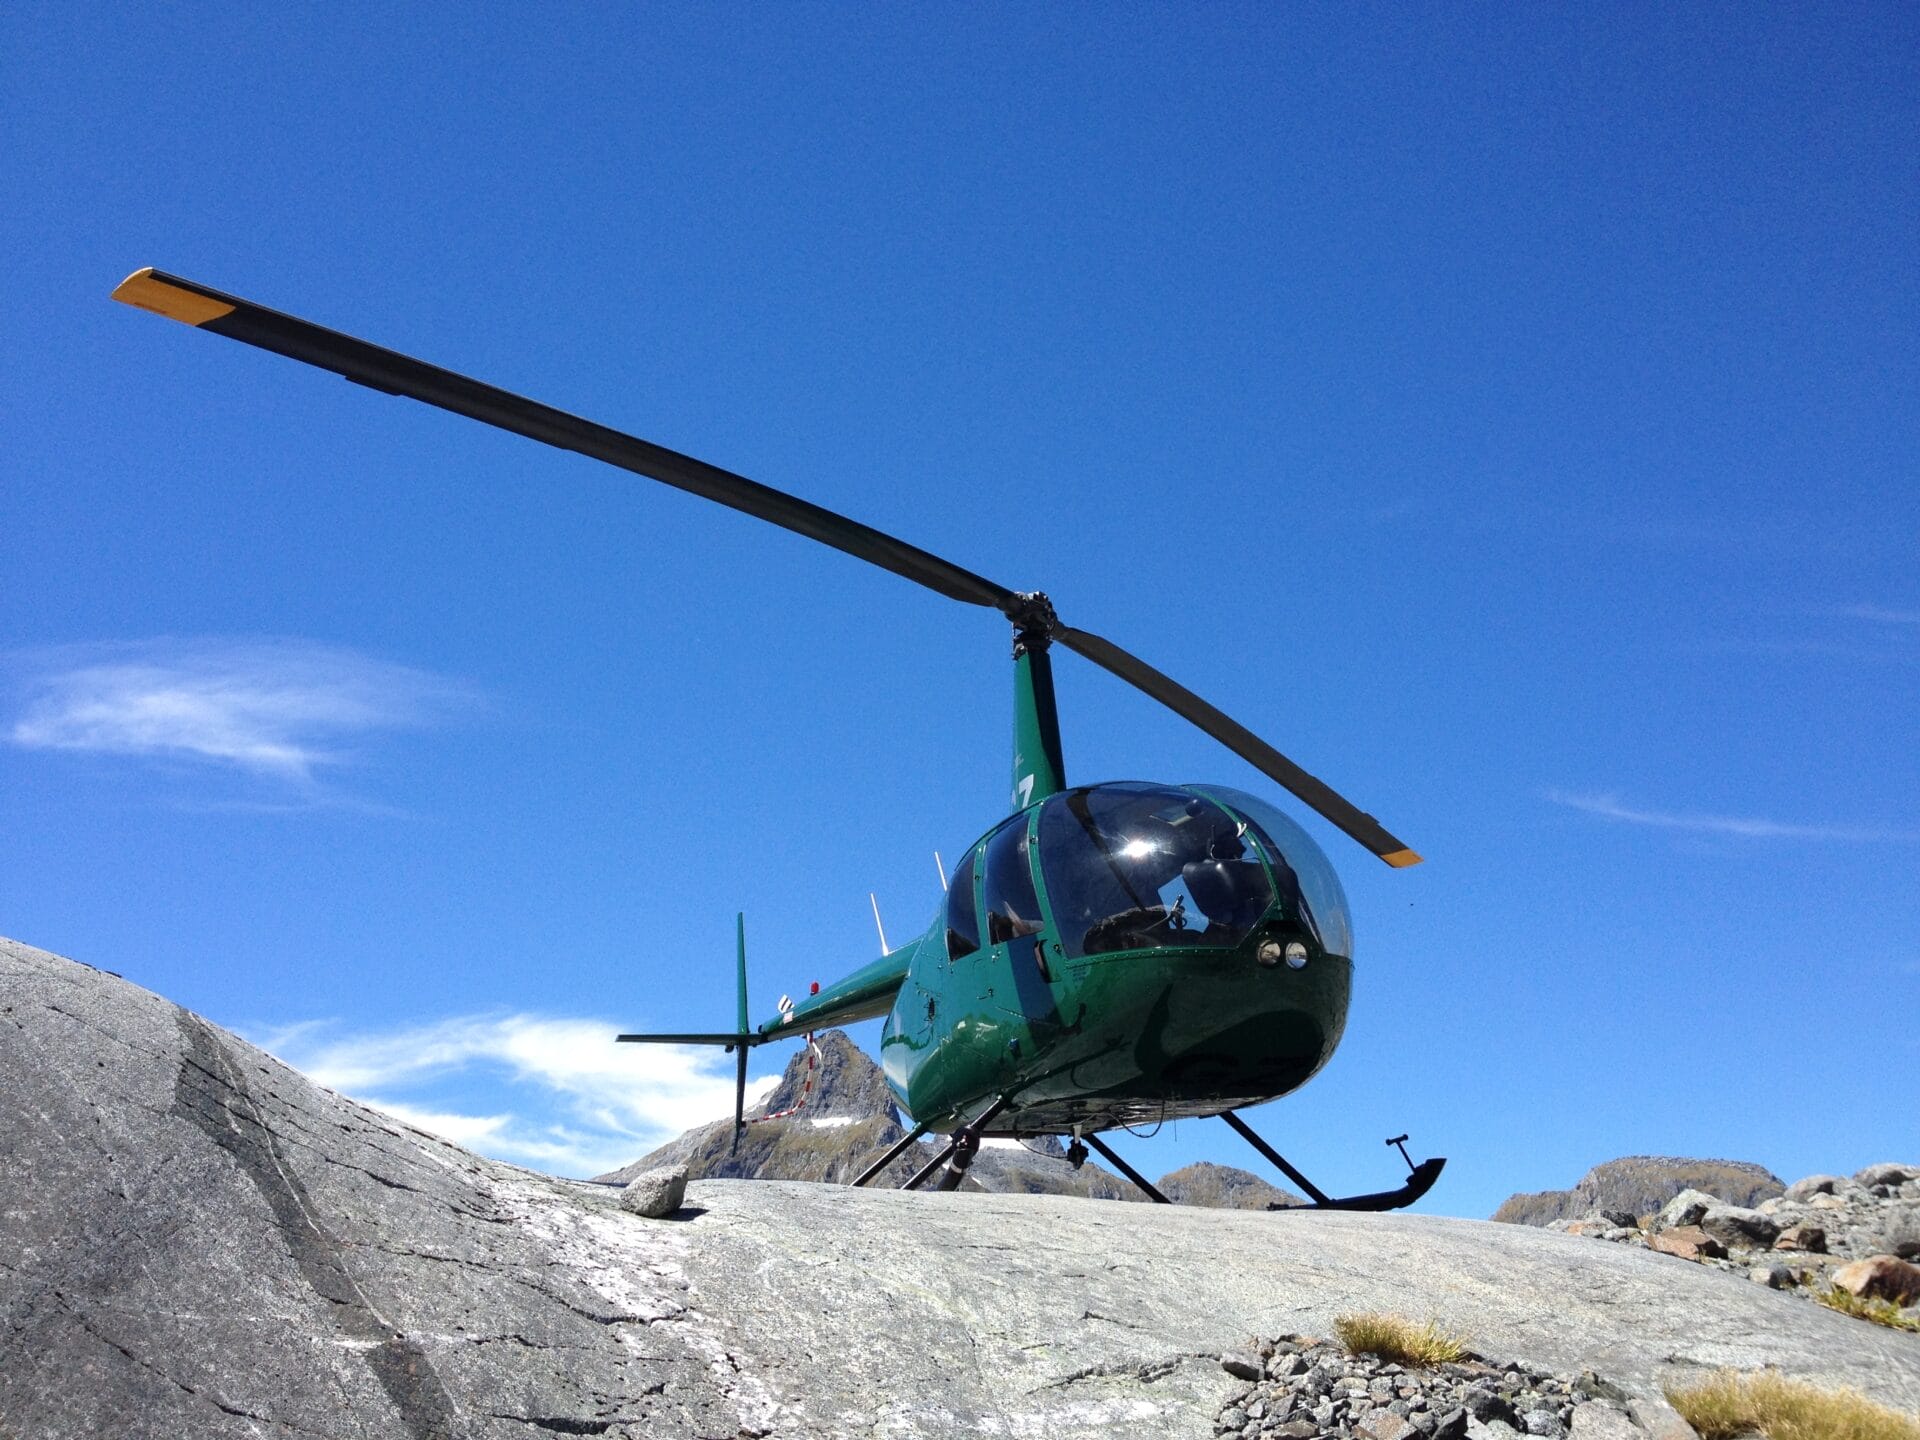 A green helicopter parked on a rocky terrain under a clear blue sky.